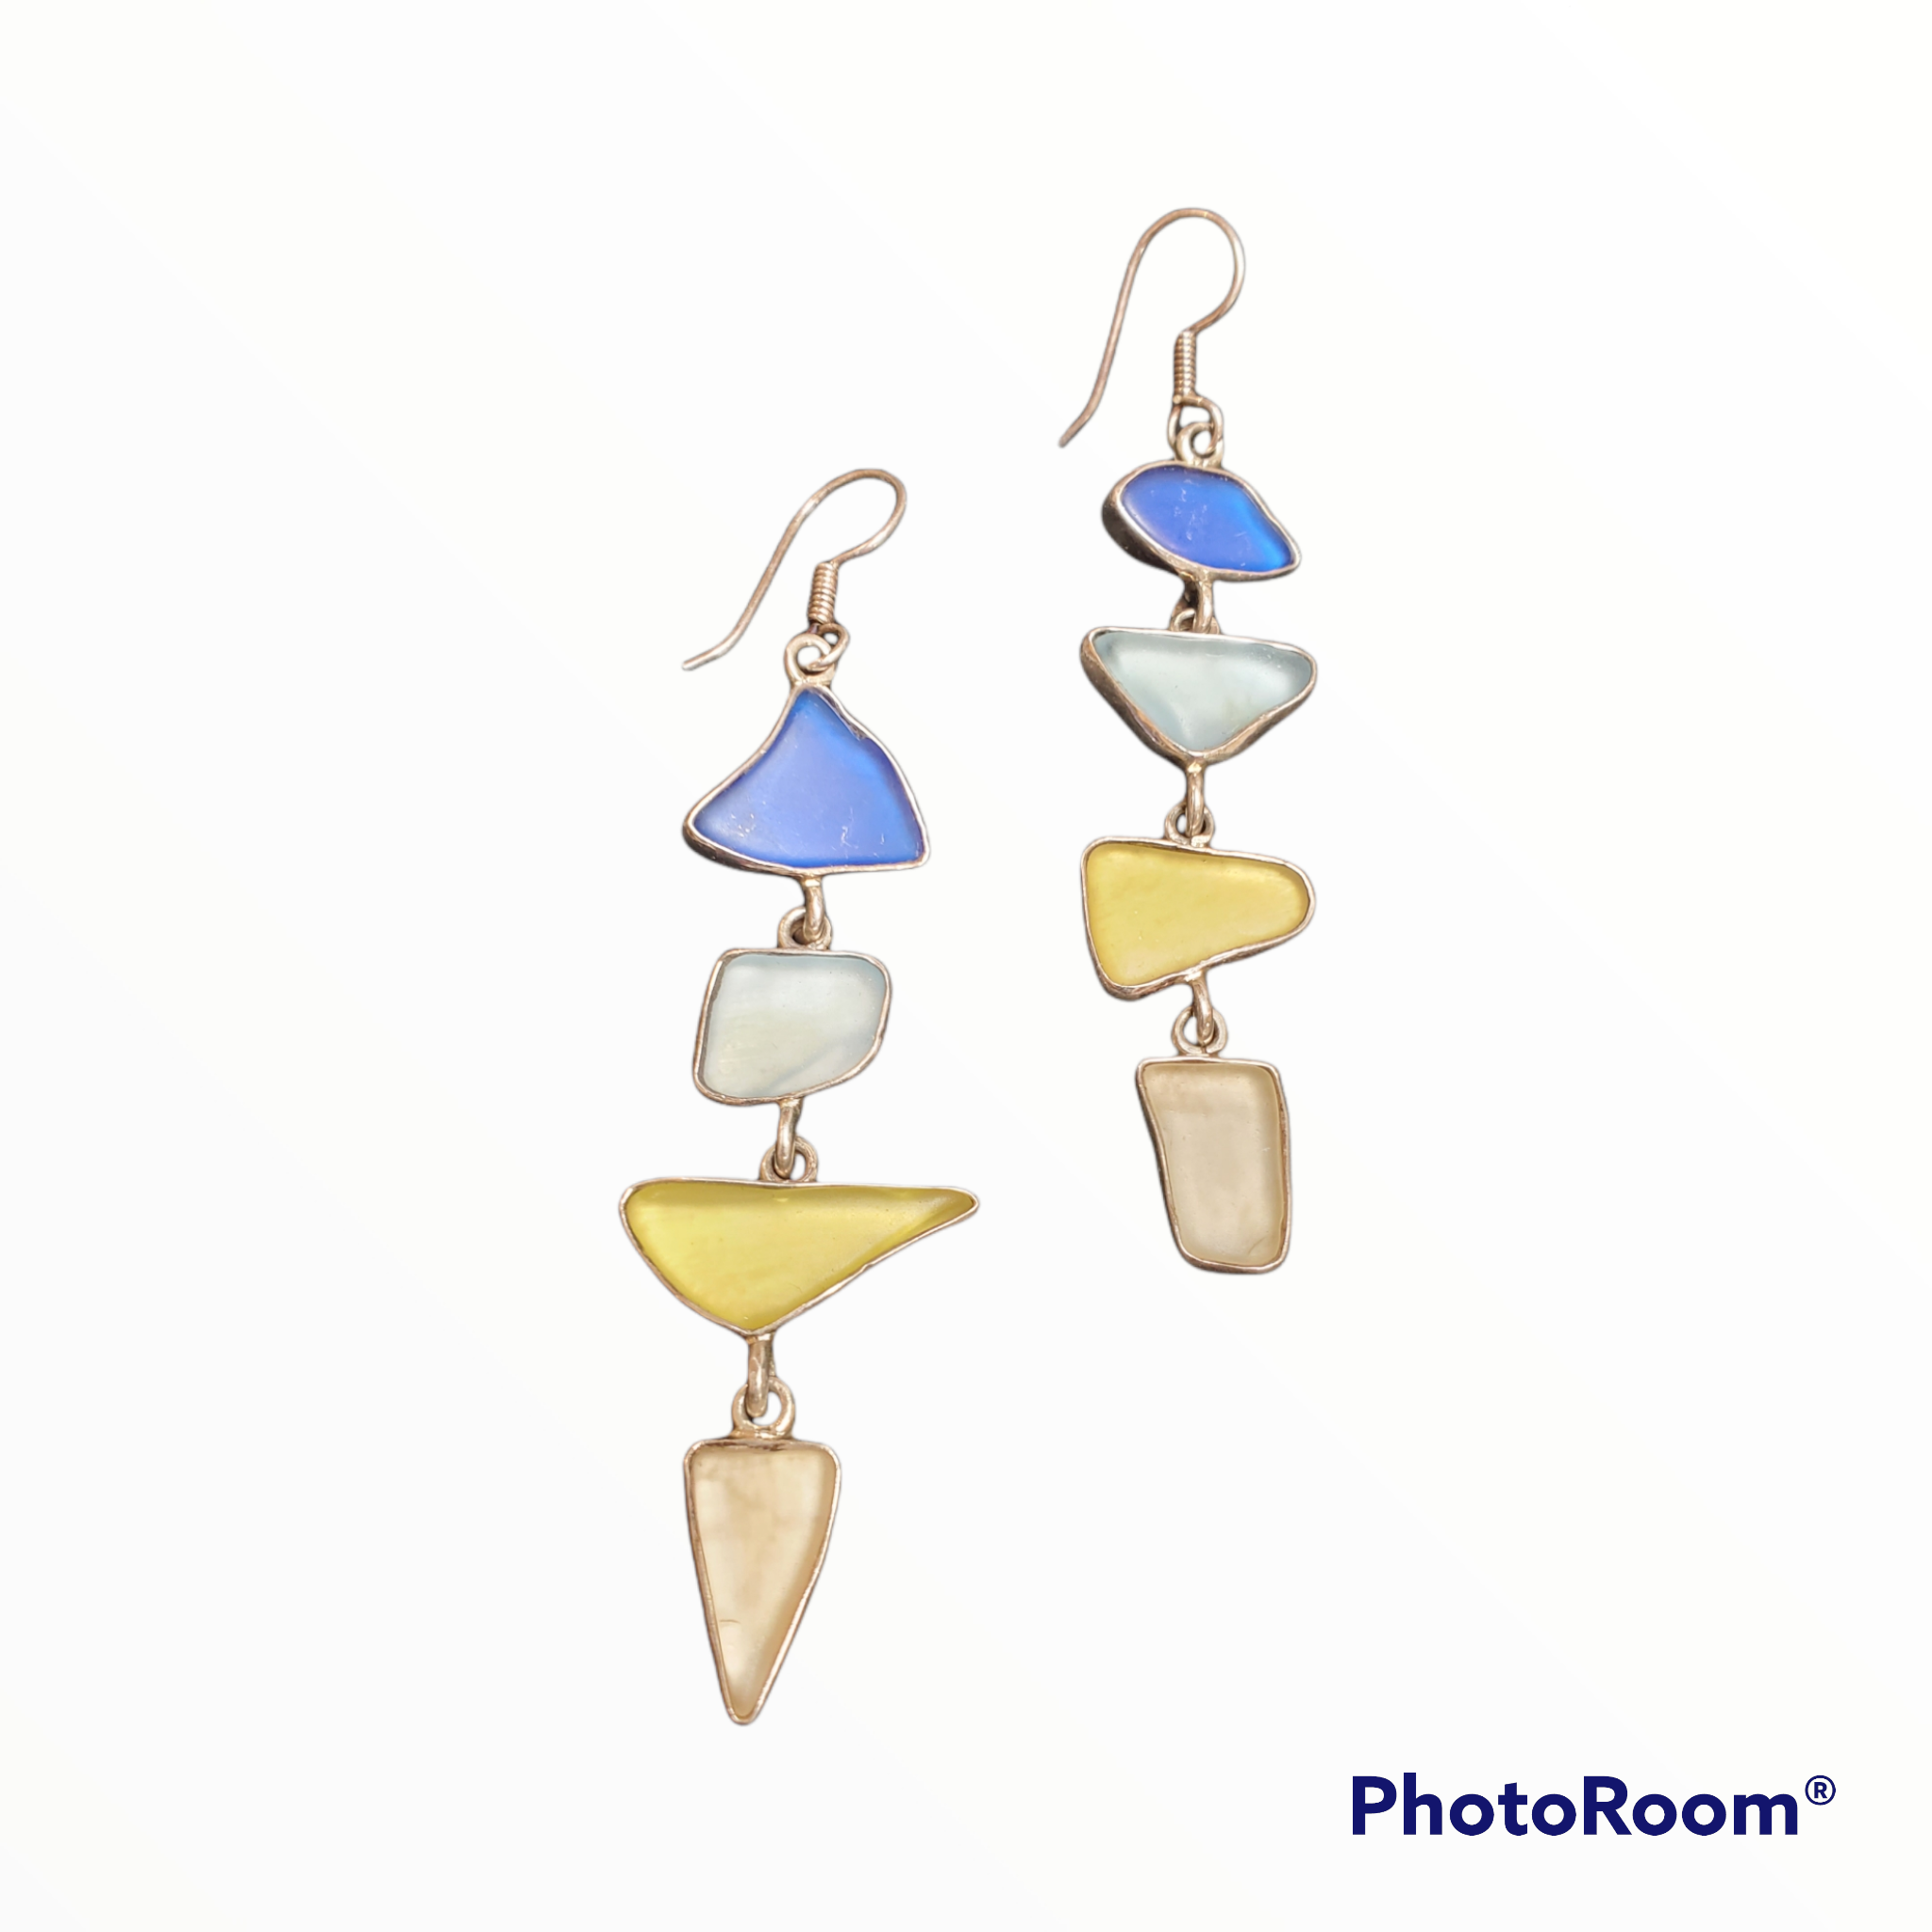 ALCHEMIA RECYCLED MULTI-COLOR GLASS EARRINGS